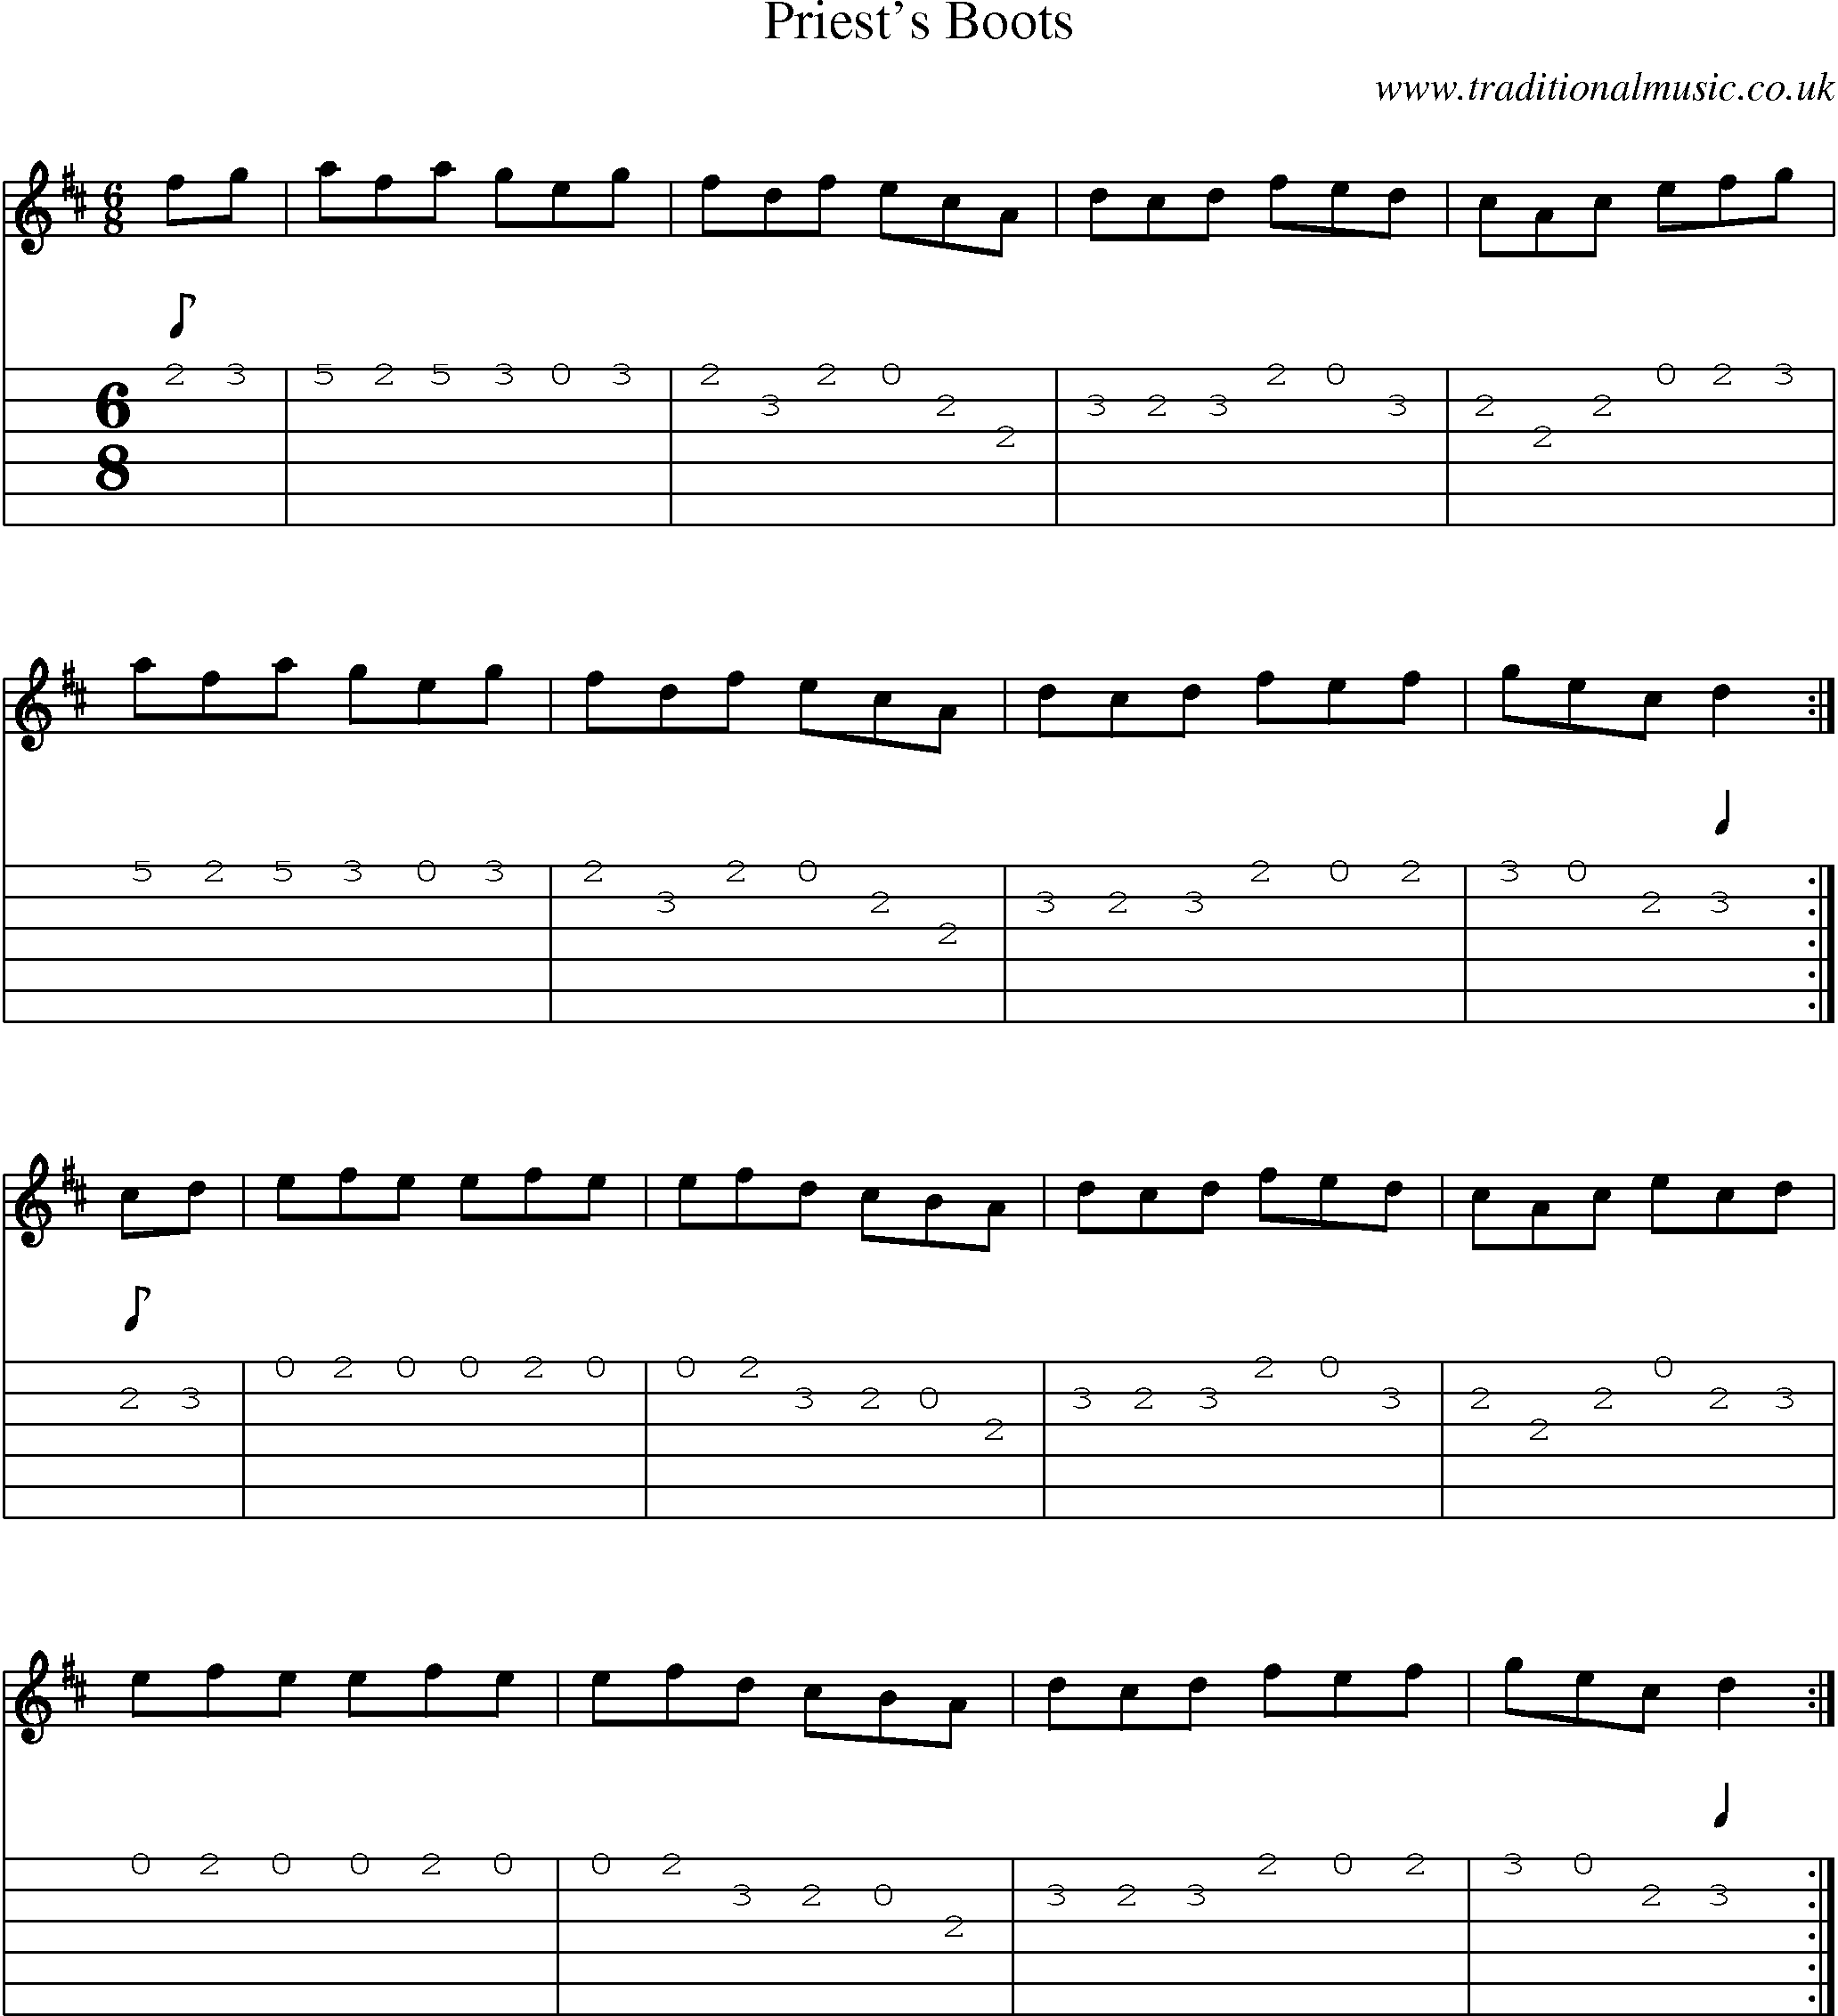 Music Score and Guitar Tabs for Priests Boots